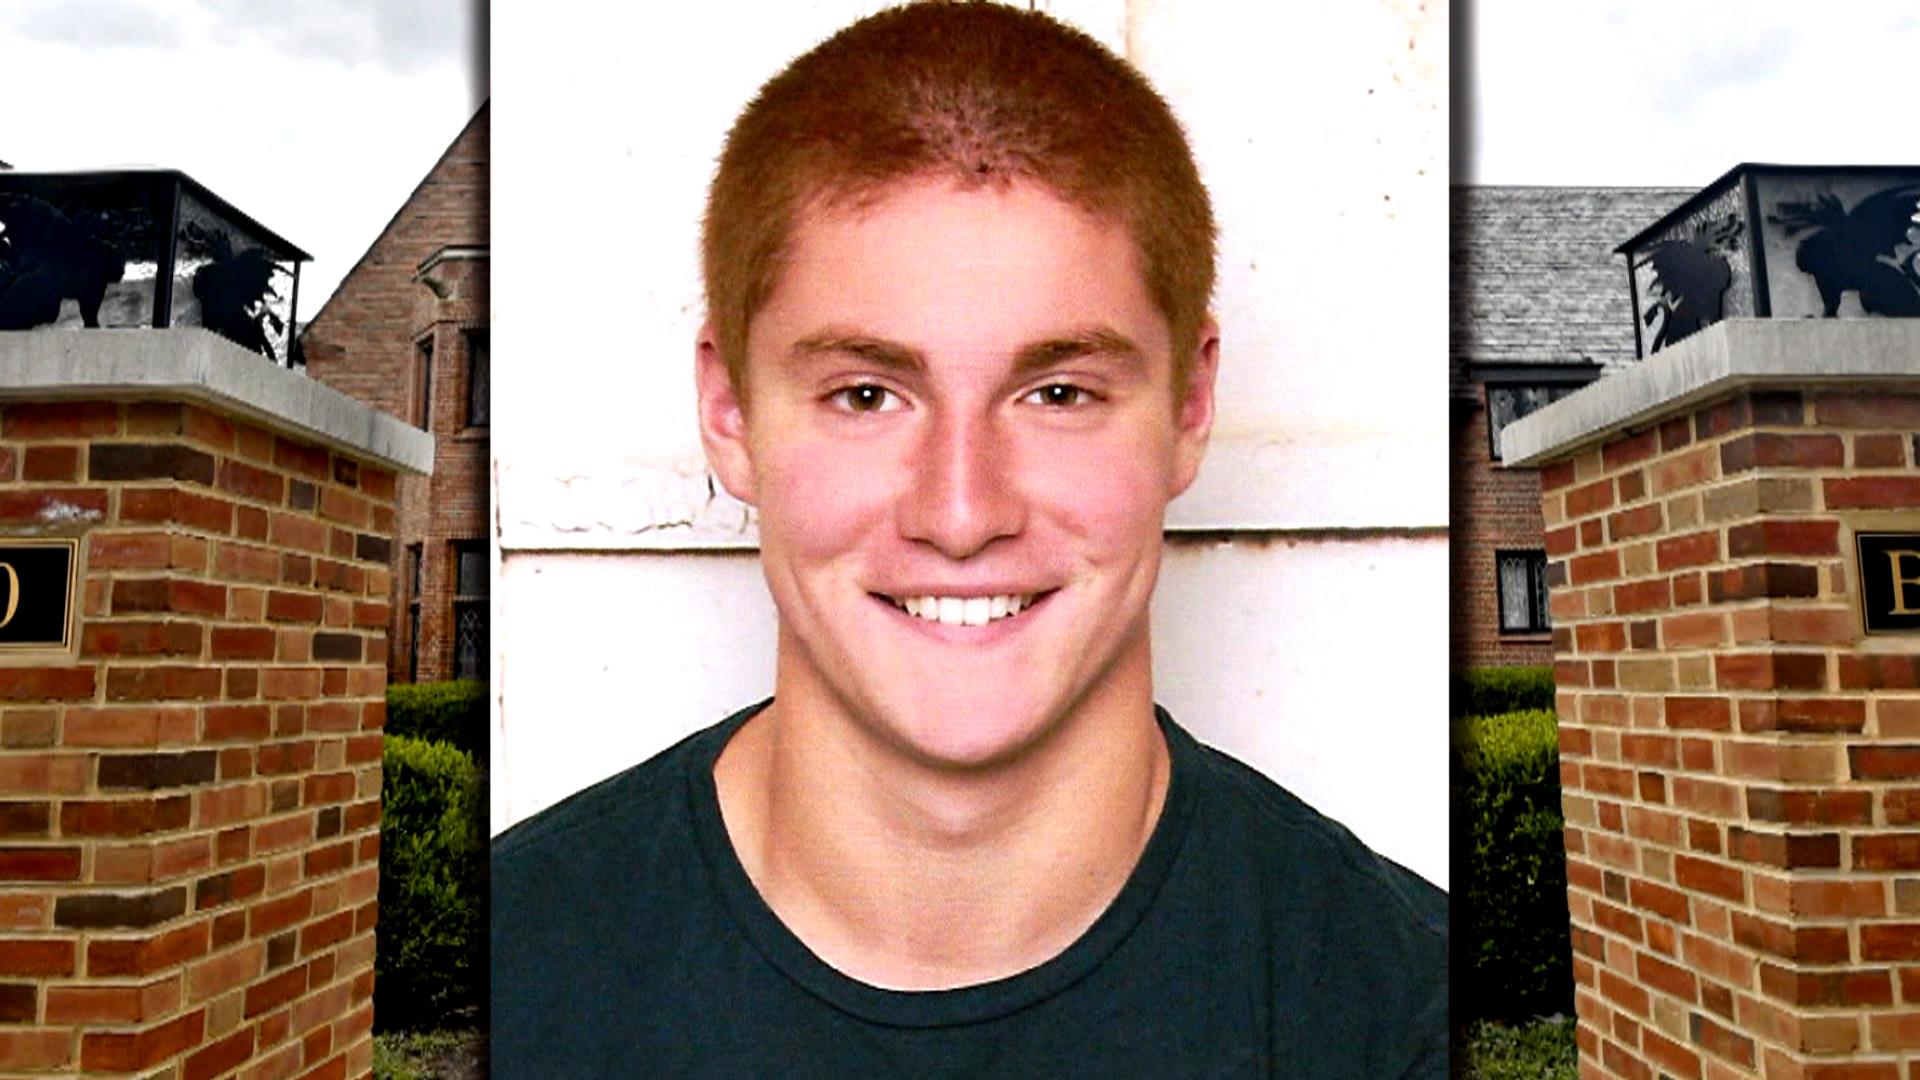 Timothy Piazza, 19, died in February, apparently due to a fraternity hazing...